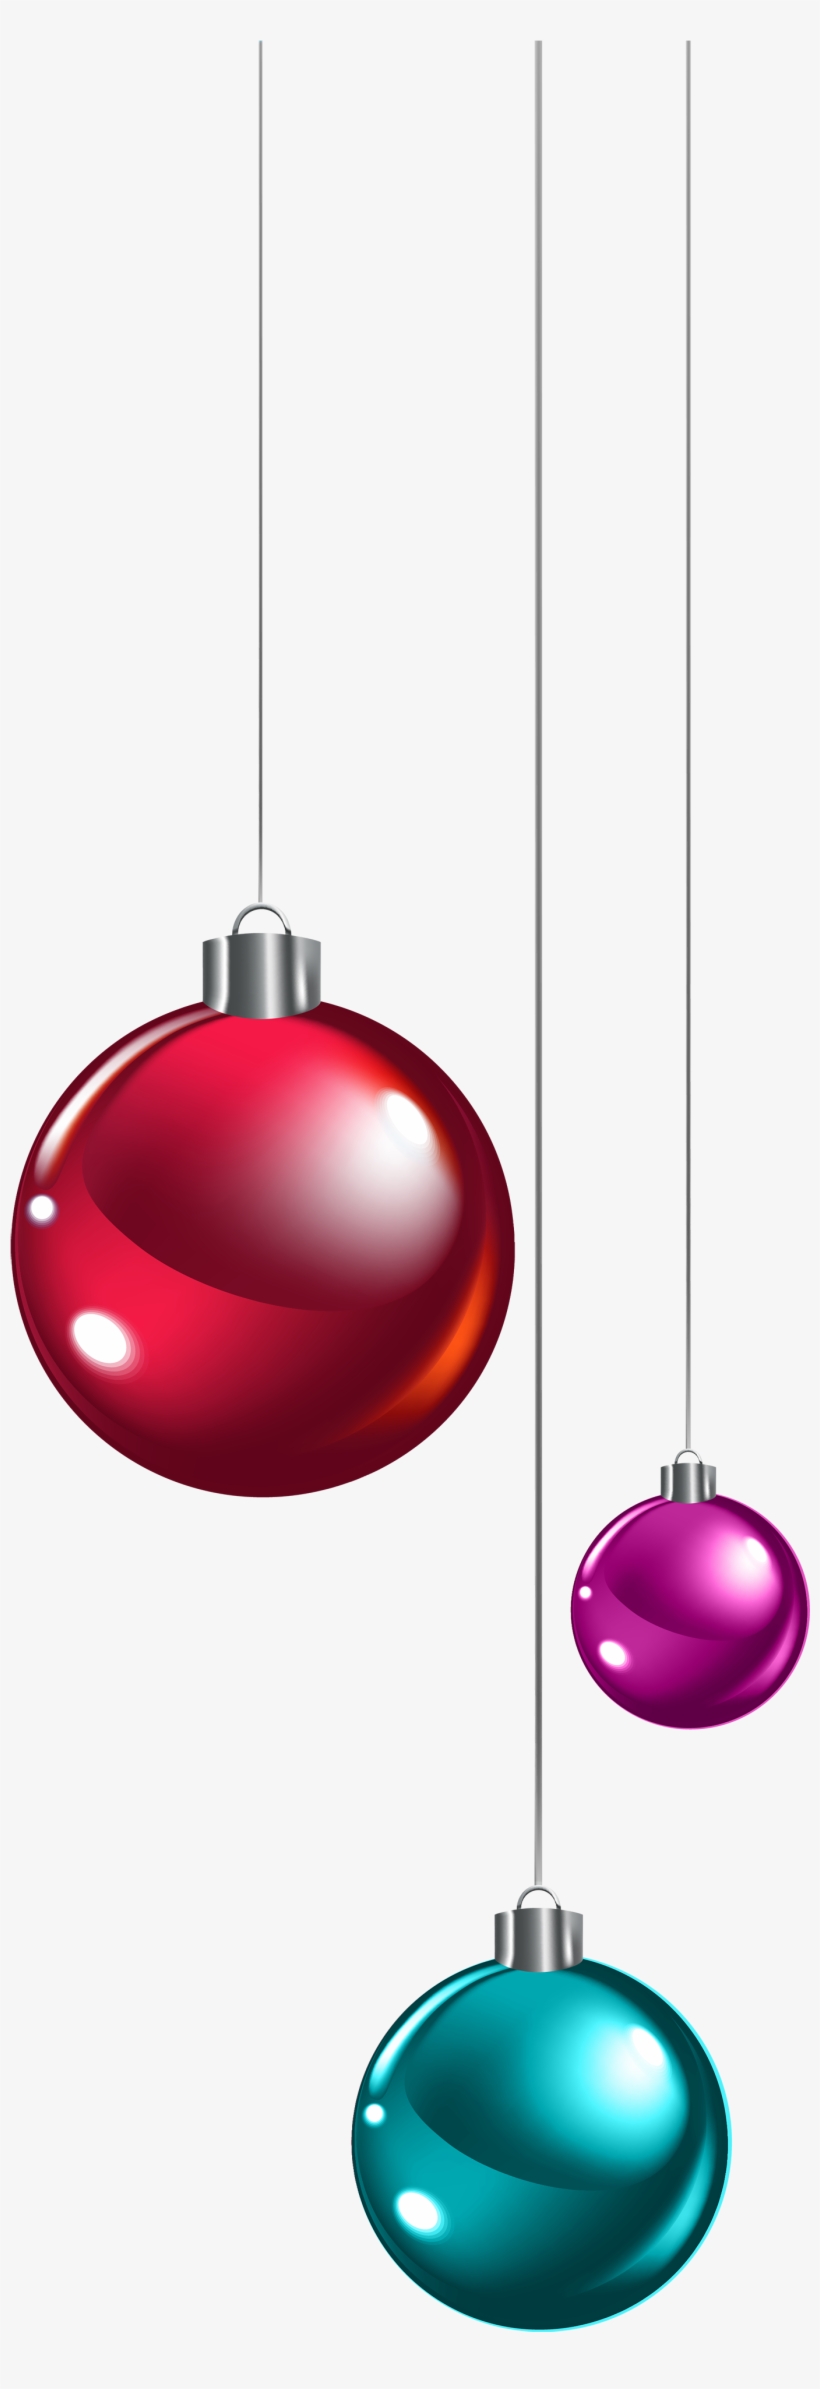 28 Collection Of Hanging Christmas Ornaments Clipart - Portable Network Graphics, transparent png #500402